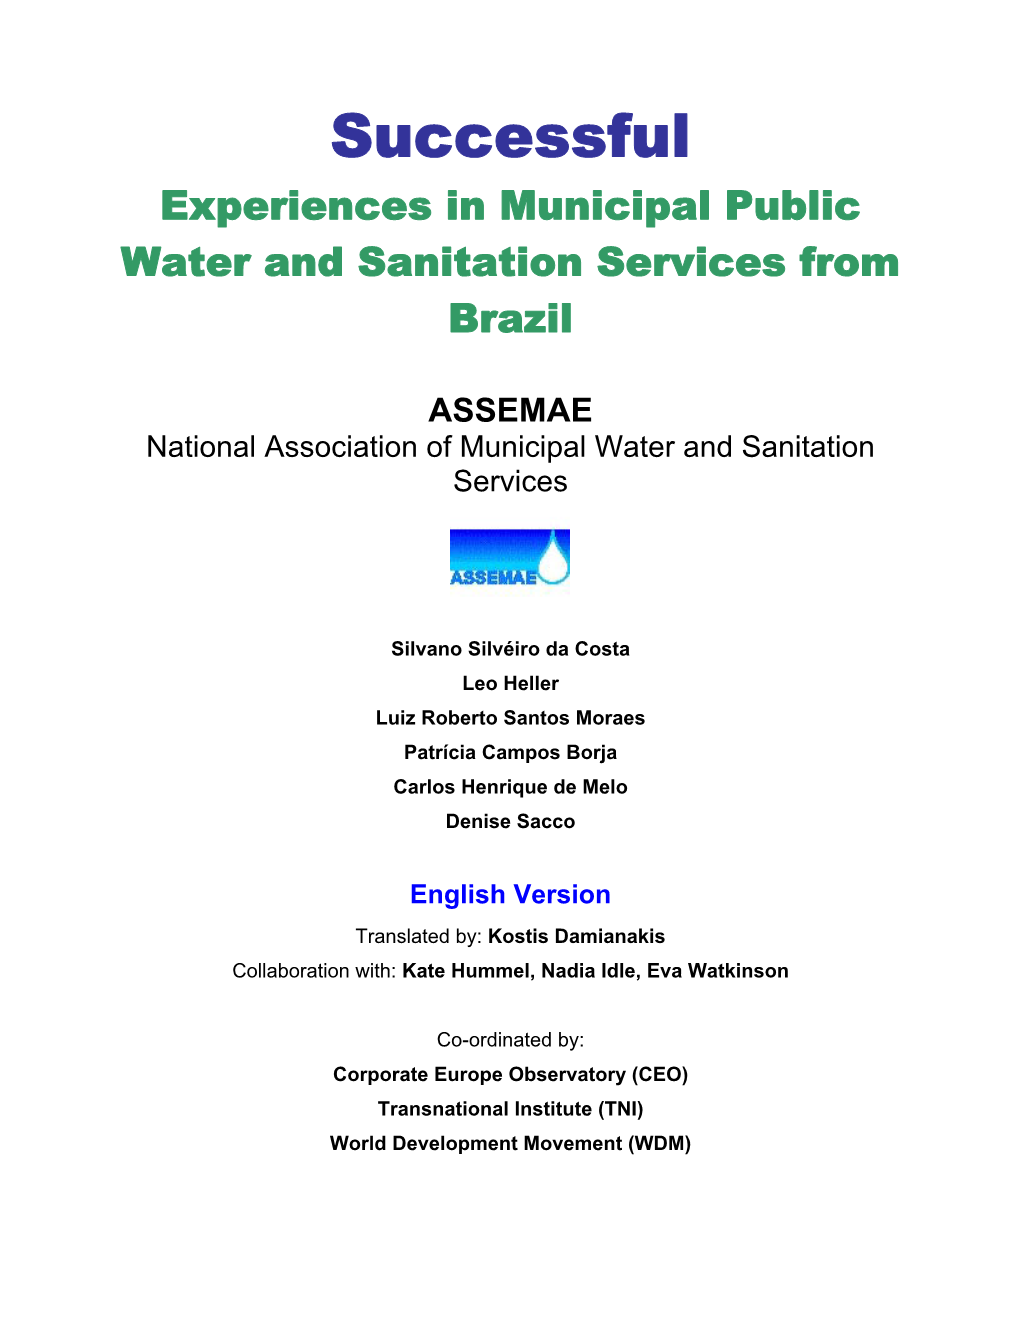 Successful Experiences in Municipal Public Water and Sanitation Services from Brazil